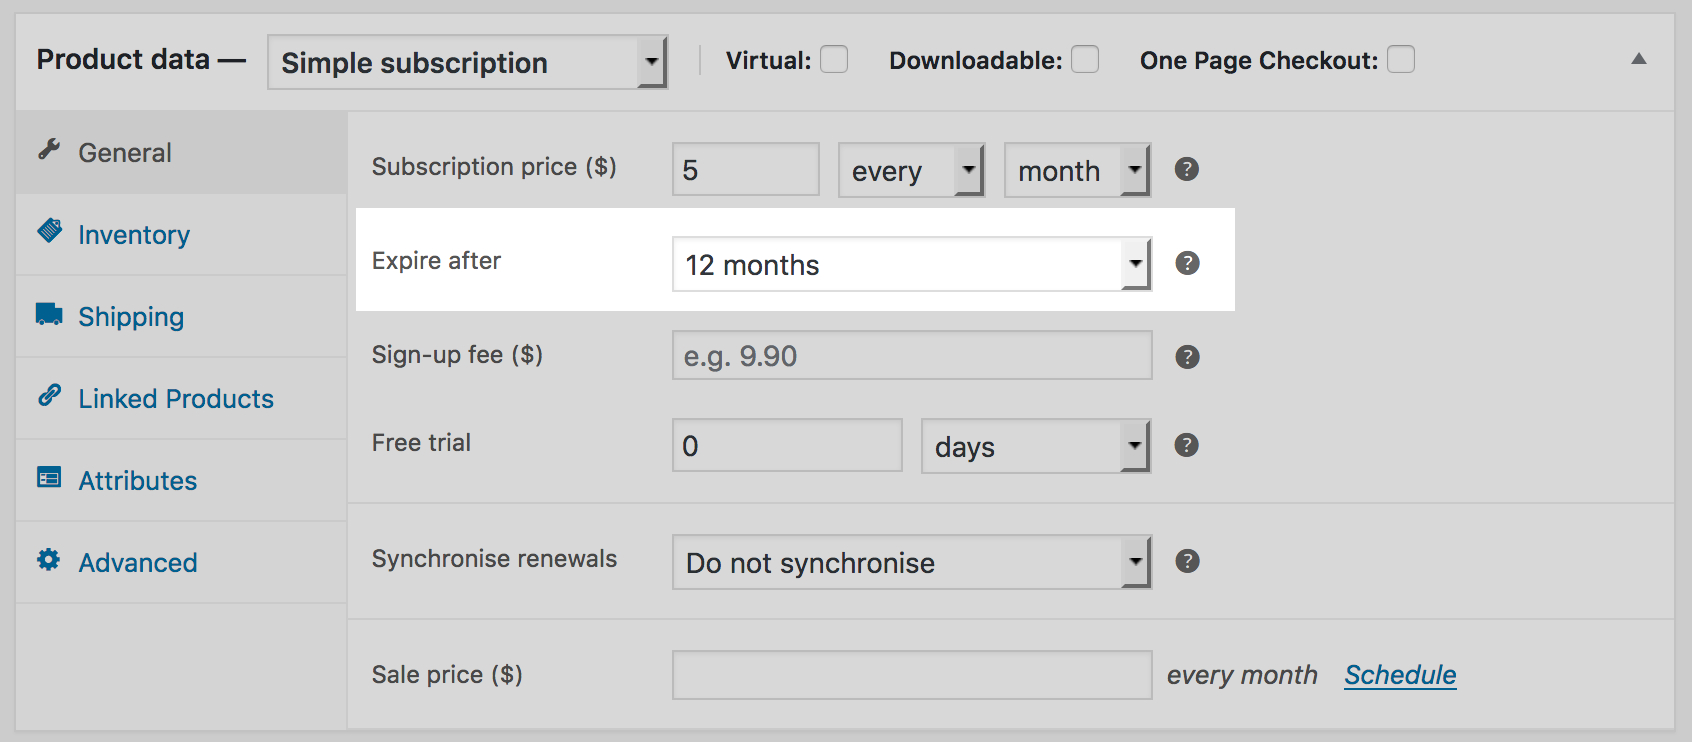 Setting the subscription length (the "Expire after" field)